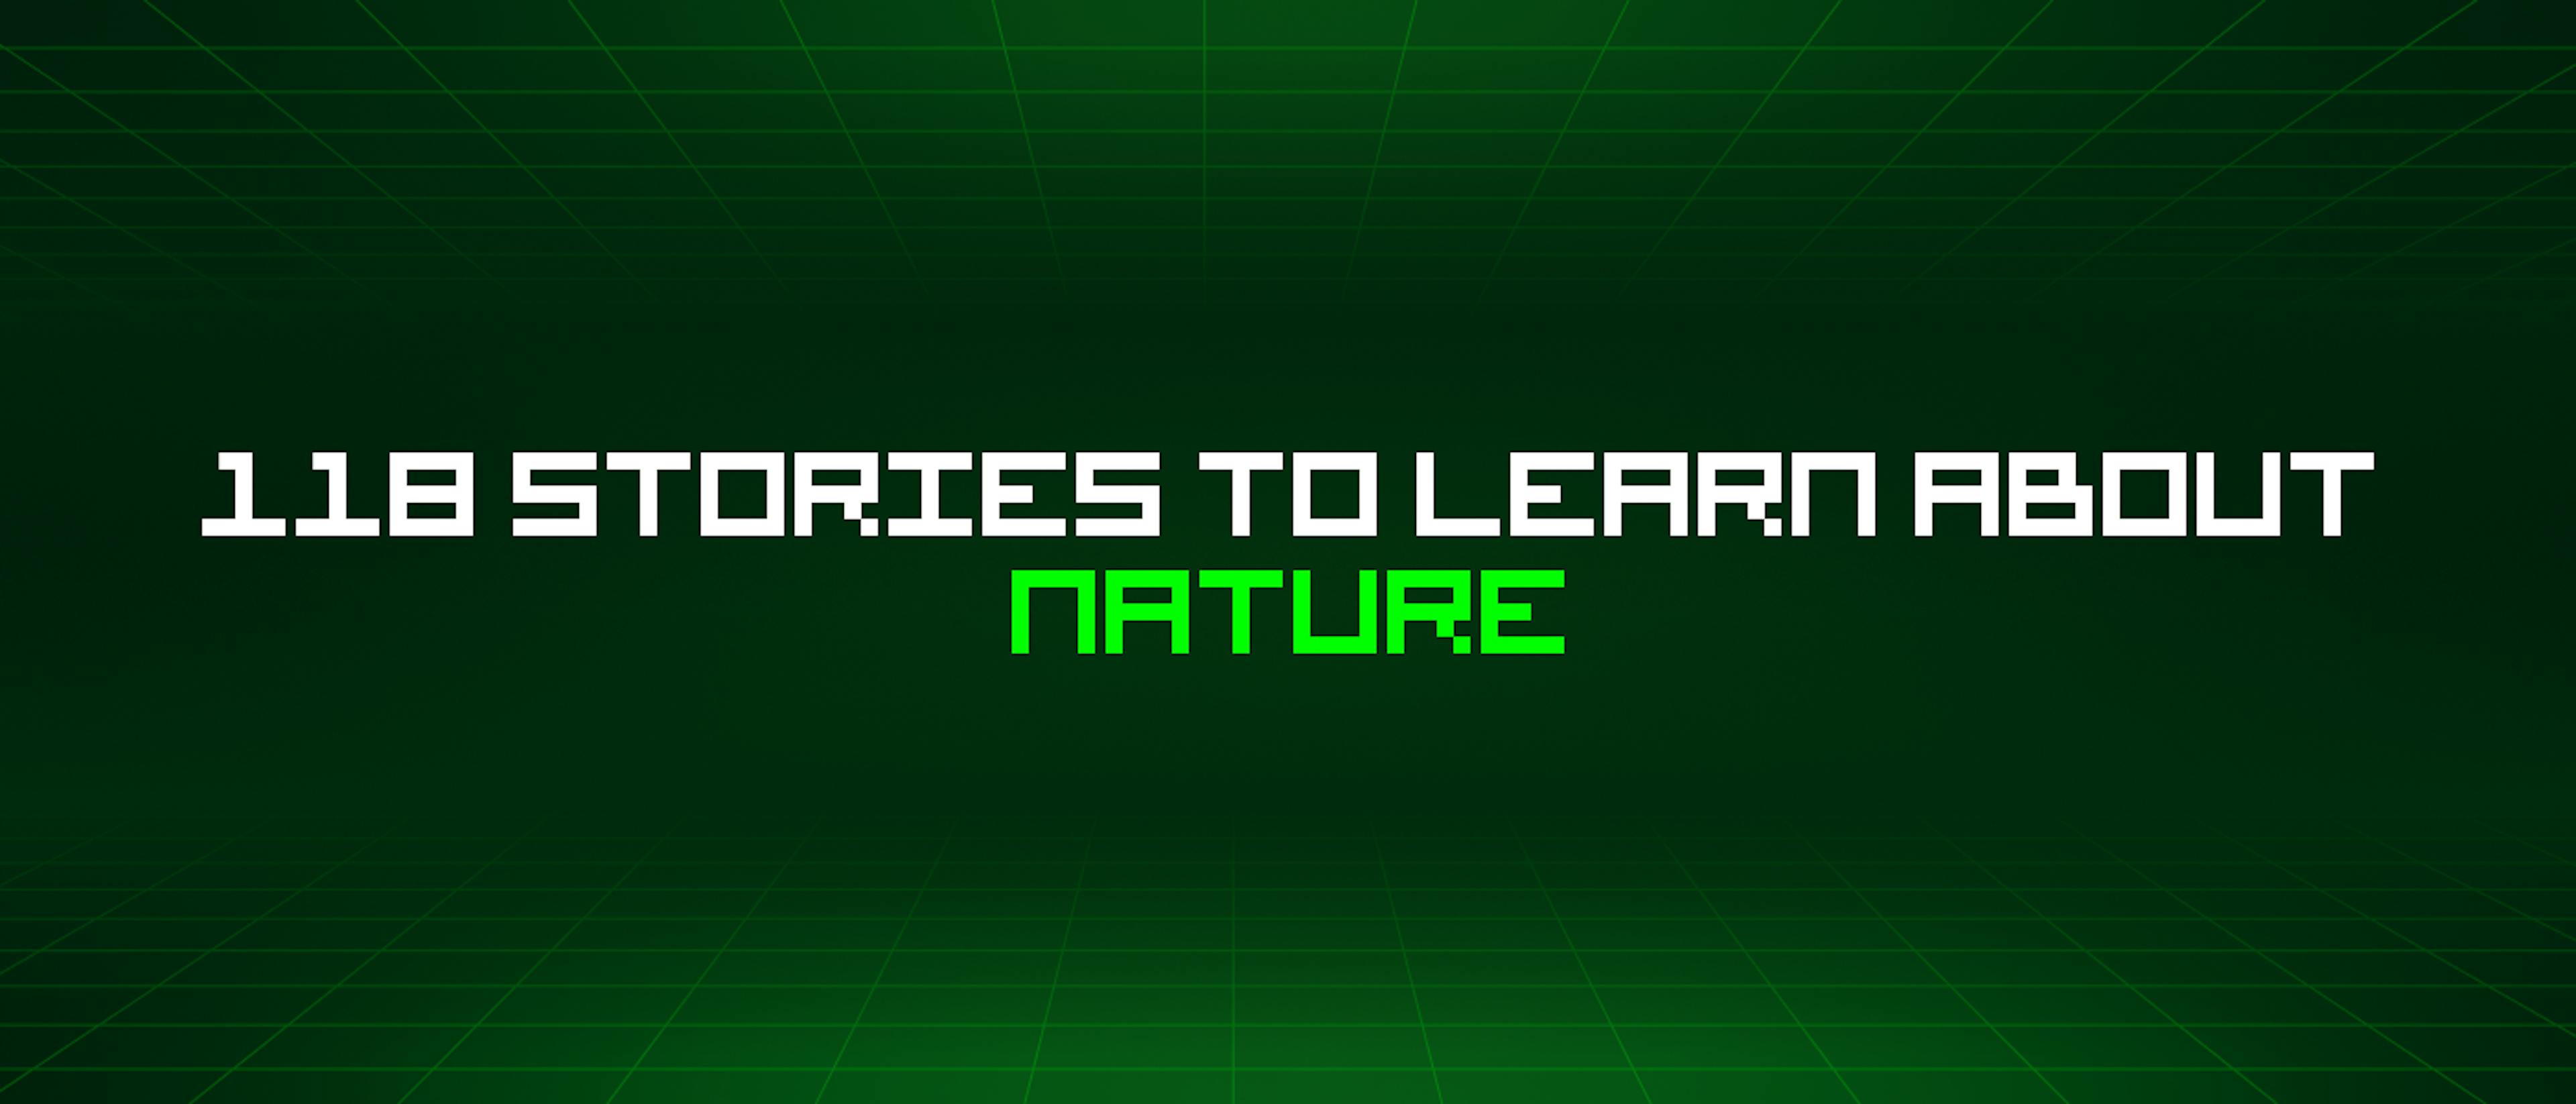 featured image - 118 Stories To Learn About Nature